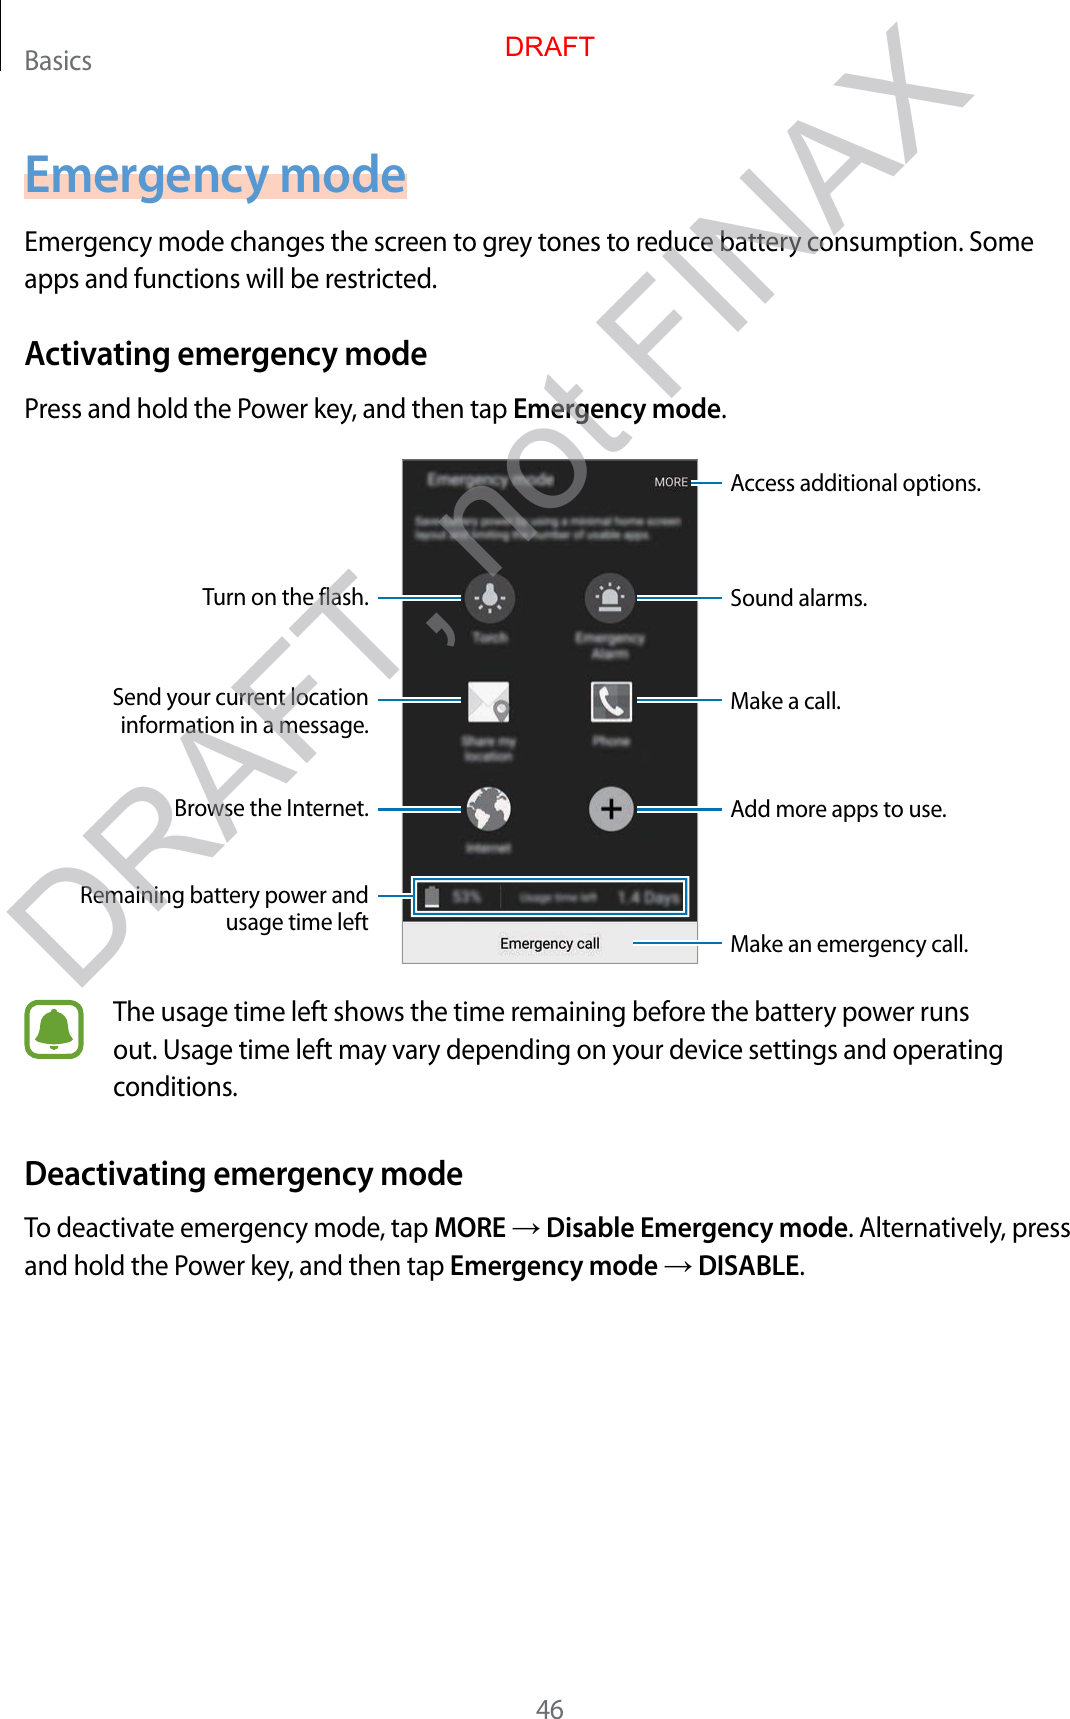 Basics46Emergency modeEmergency mode changes the screen to grey tones to reduce battery consumption. Some apps and functions will be restricted.Activating emergency modePress and hold the Power key, and then tap Emergency mode.Add more apps to use.Make an emergency call.Remaining battery power and usage time leftTurn on the flash.Make a call.Send your current location information in a message.Browse the Internet.Access additional options.Sound alarms.The usage time left shows the time remaining before the battery power runs out. Usage time left may vary depending on your device settings and operating conditions.Deactivating emergency modeTo deactivate emergency mode, tap MORE → Disable Emergency mode. Alternatively, press and hold the Power key, and then tap Emergency mode → DISABLE.DRAFTDRAFT, not FINAX